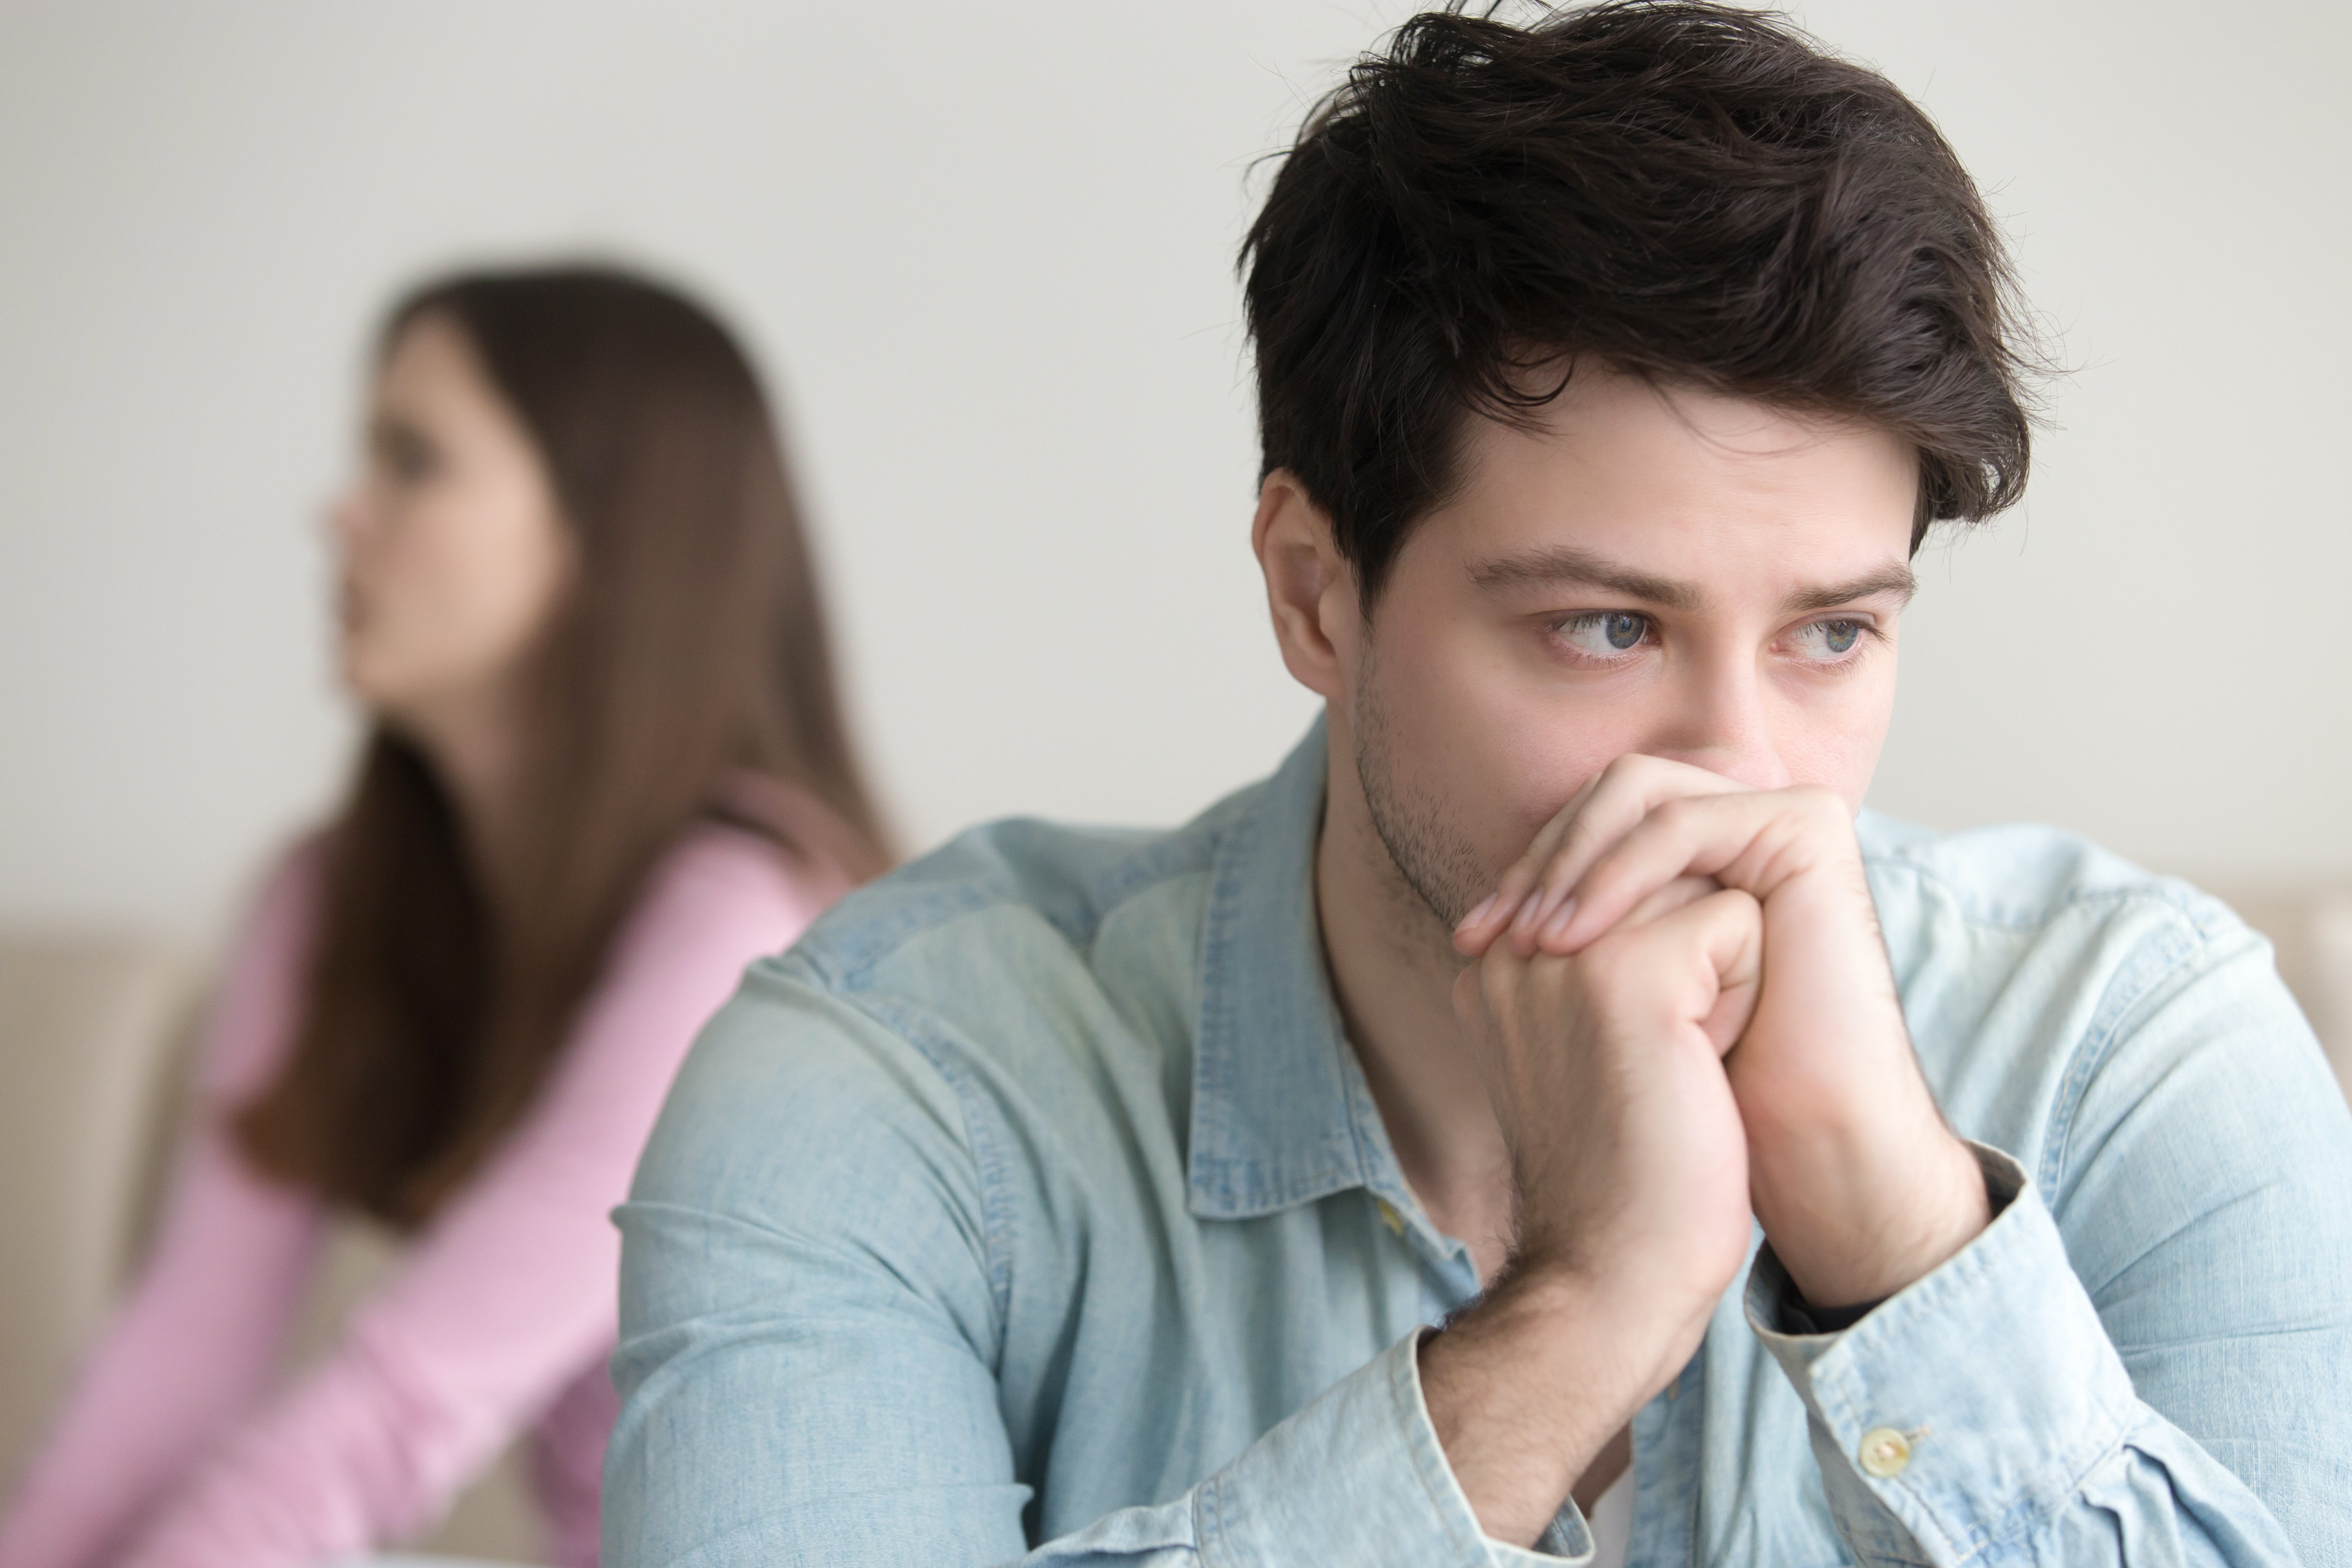 Sad young man thinking over a problem. | Source: Shutterstock